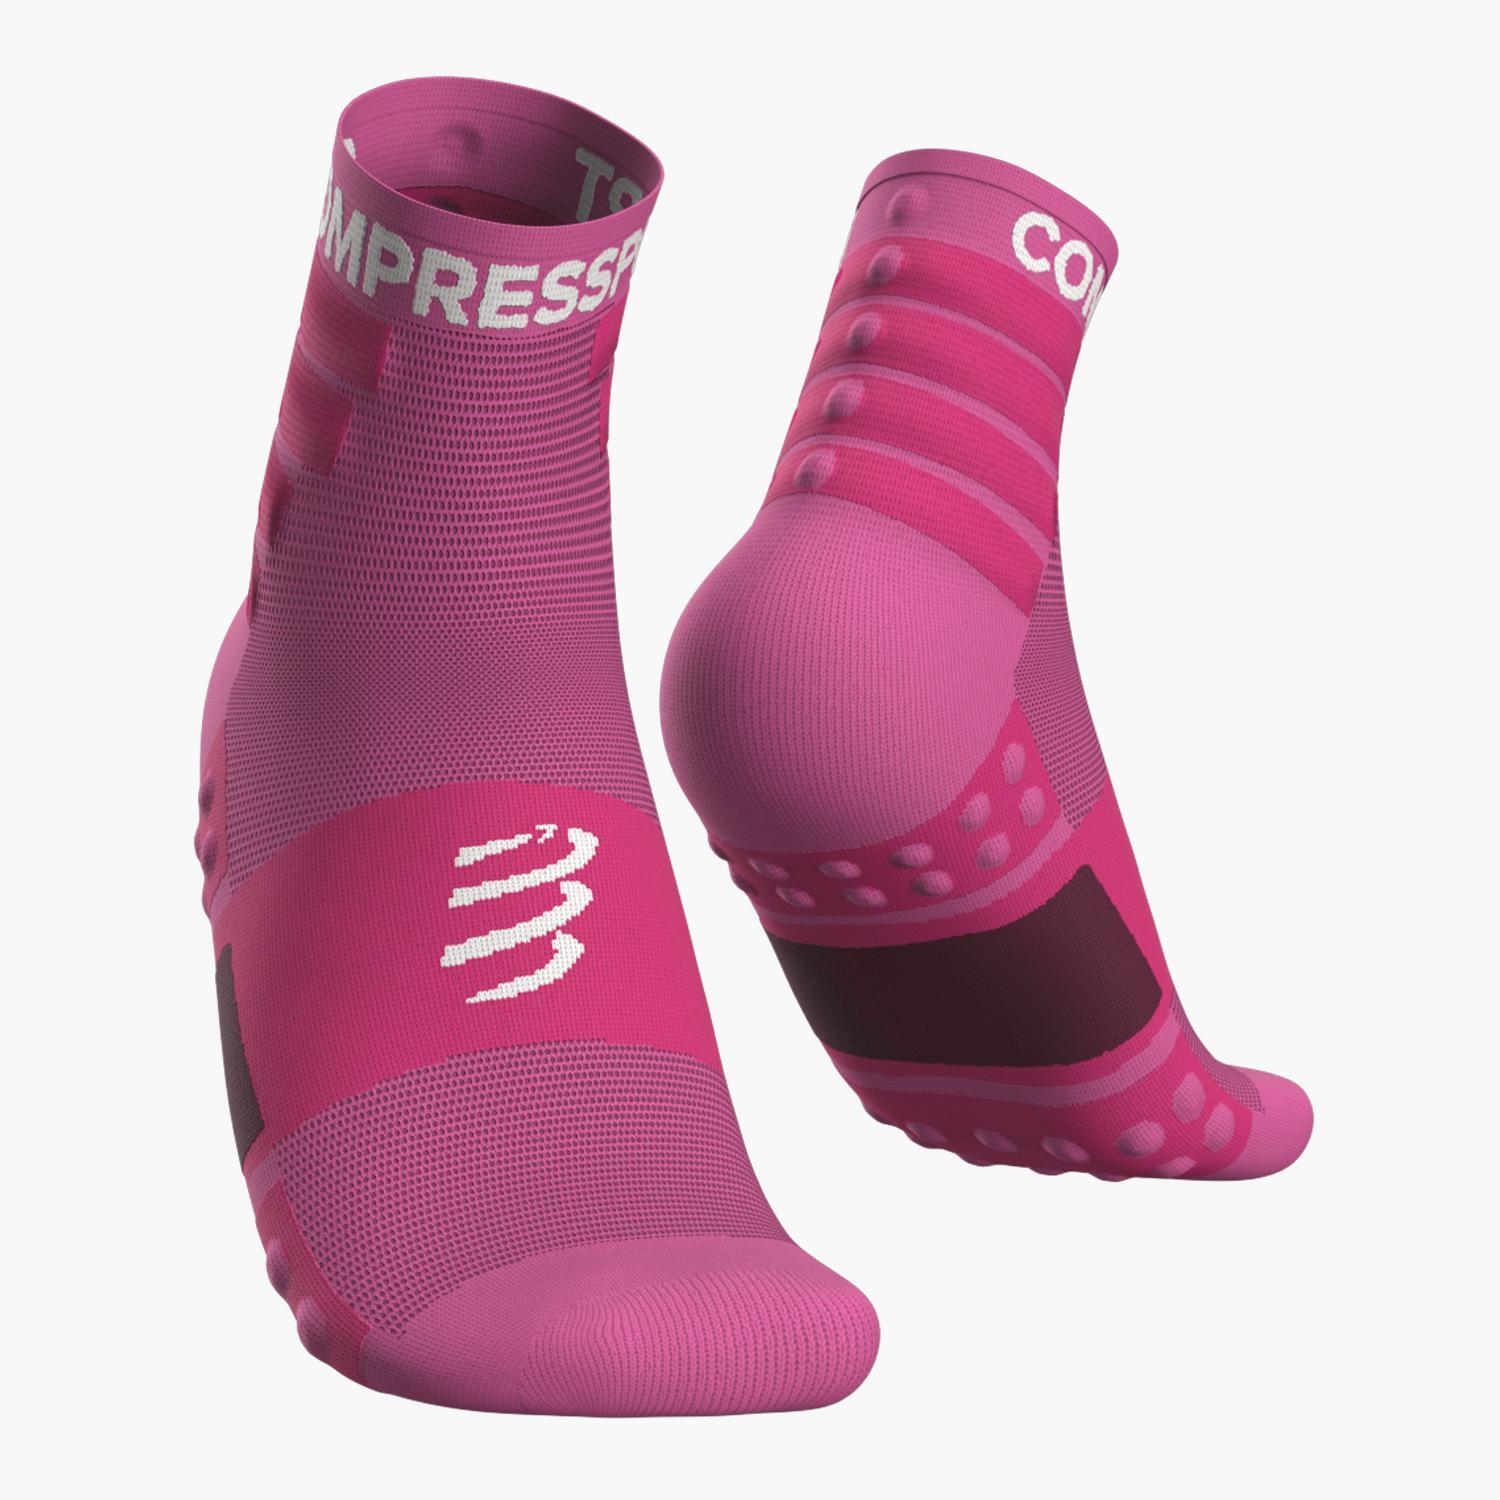 Chaussettes Compressport - Rose - Chaussettes Running Homme sports taille L